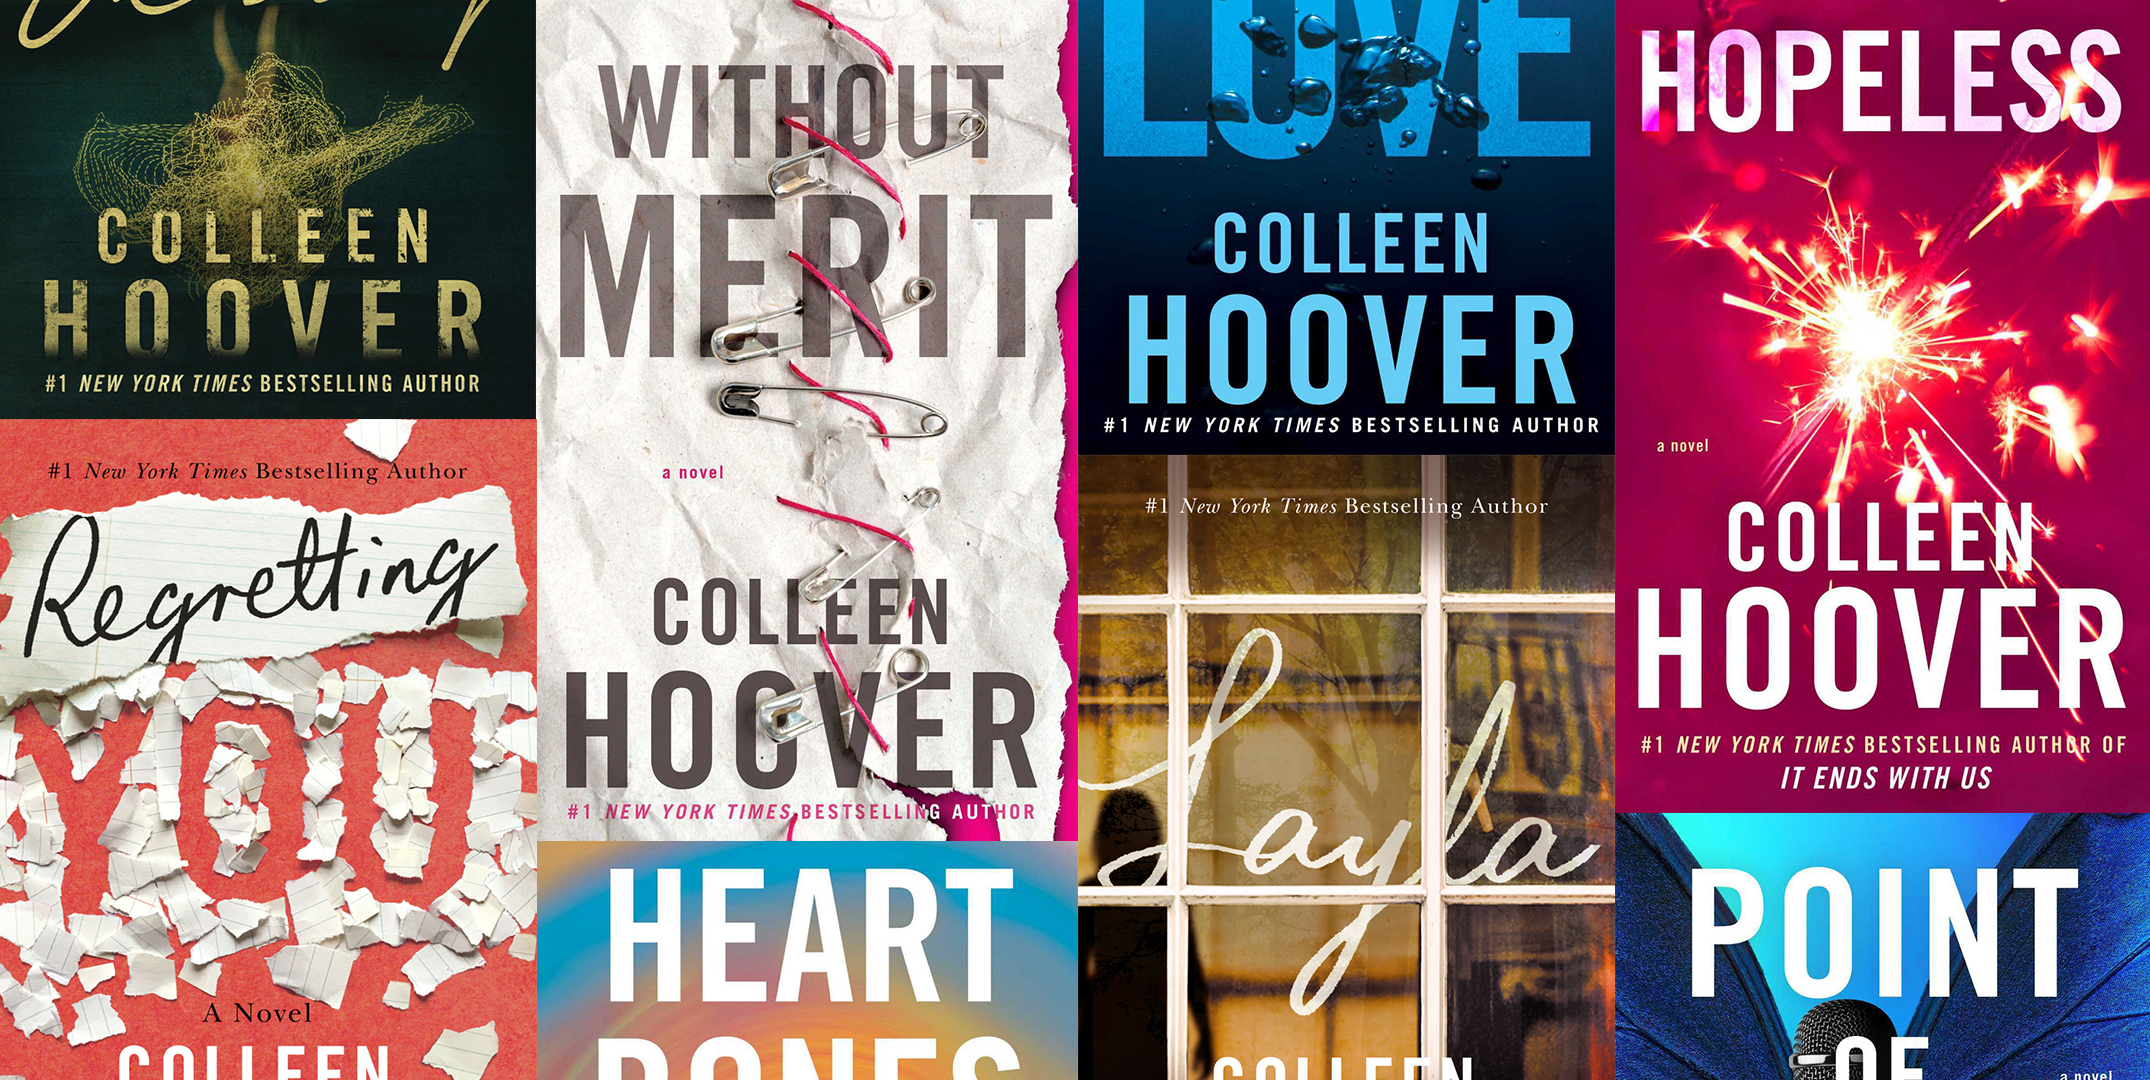 Colleen Hoover's 'It Starts With Us': Behind her Bestselling